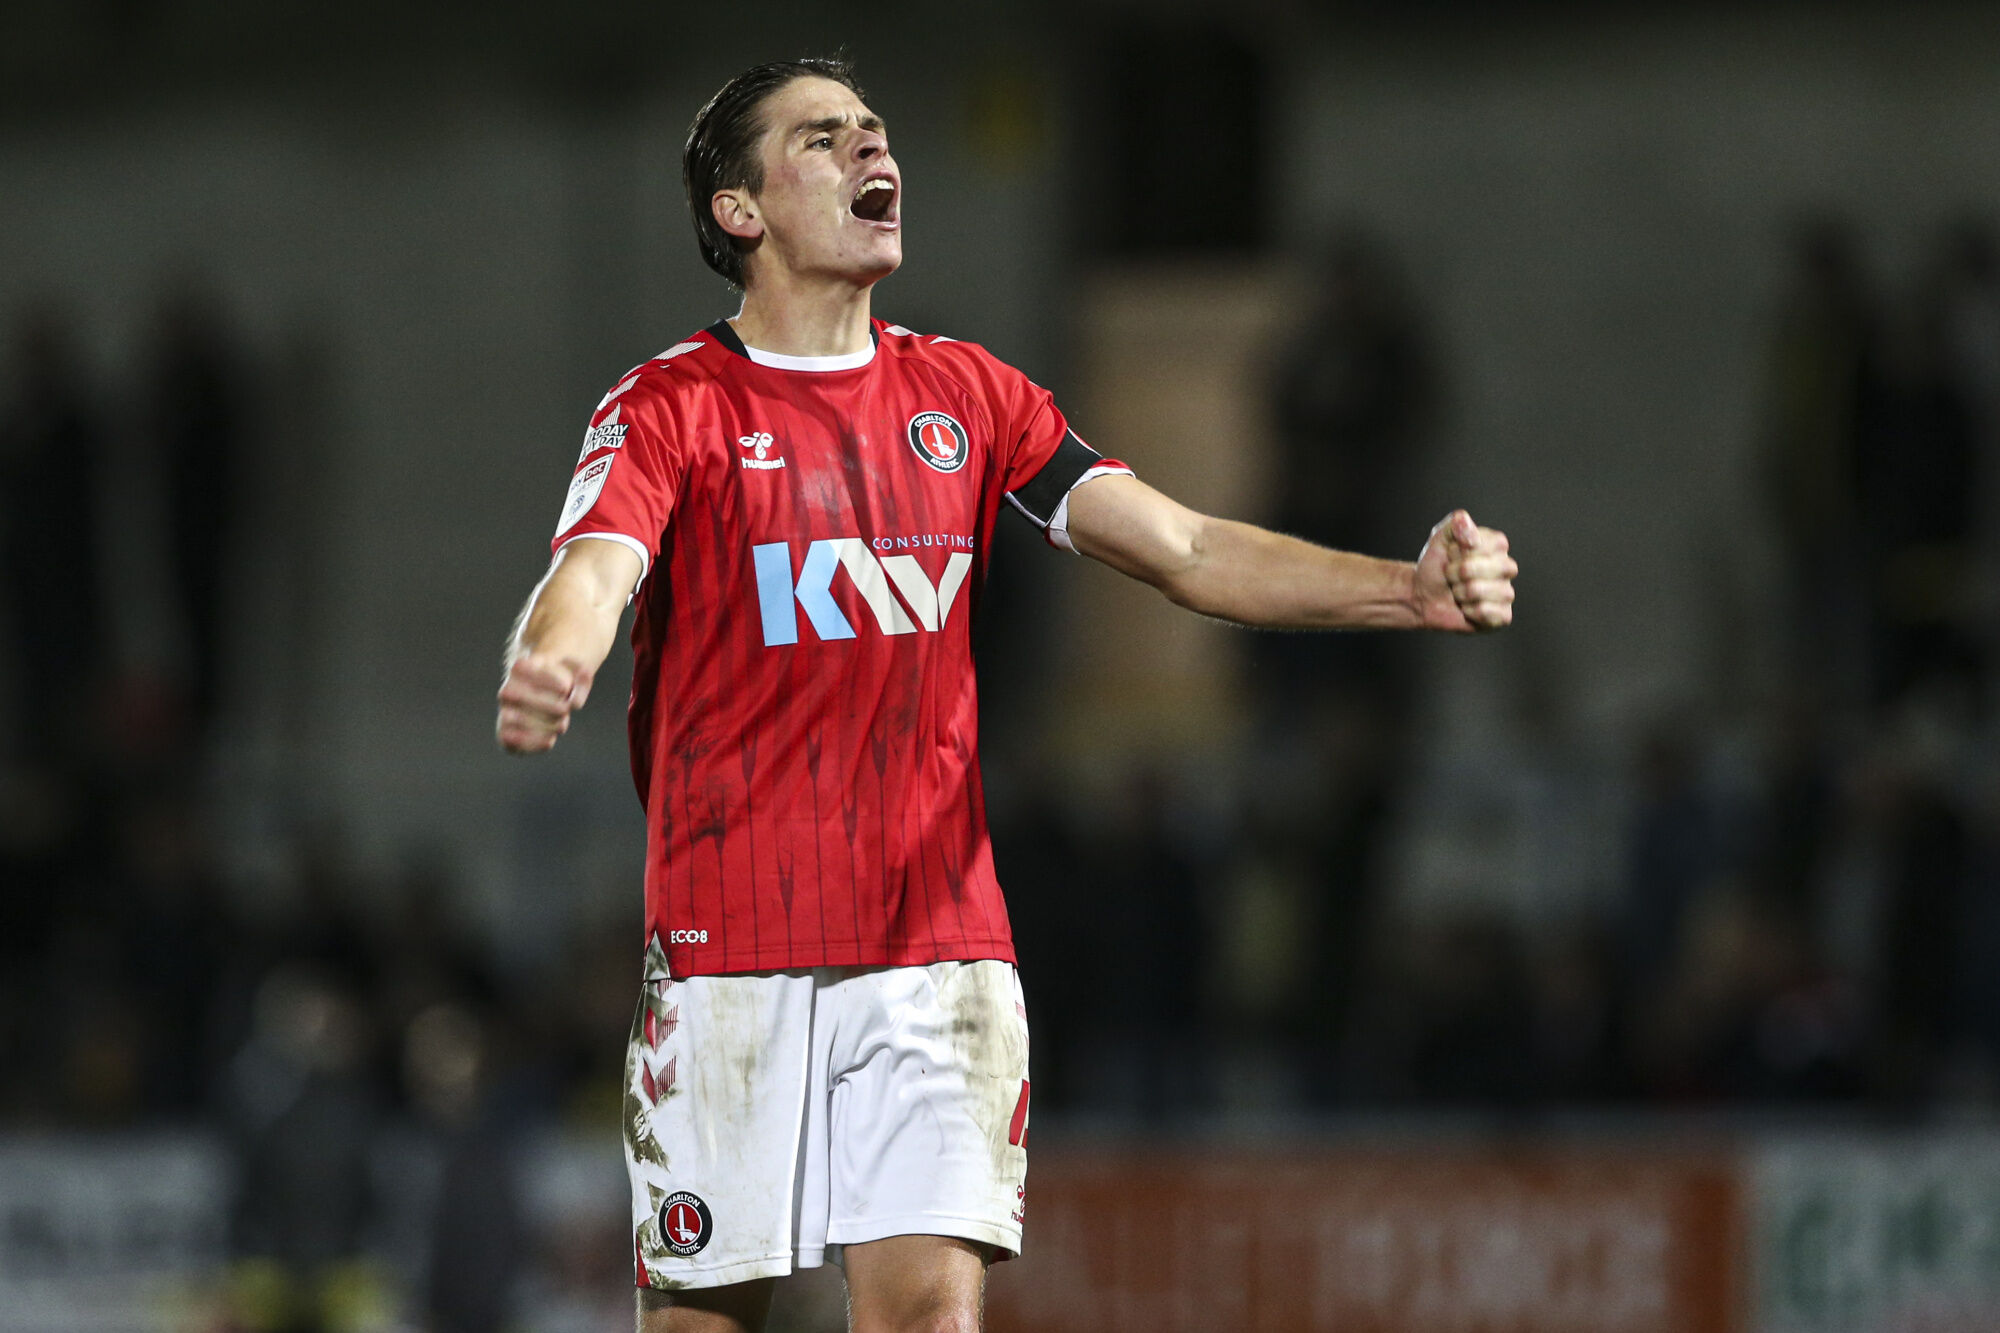 George Dobson: The Charlton Athletic man who has finally found his place at The Valley • London Football Scene